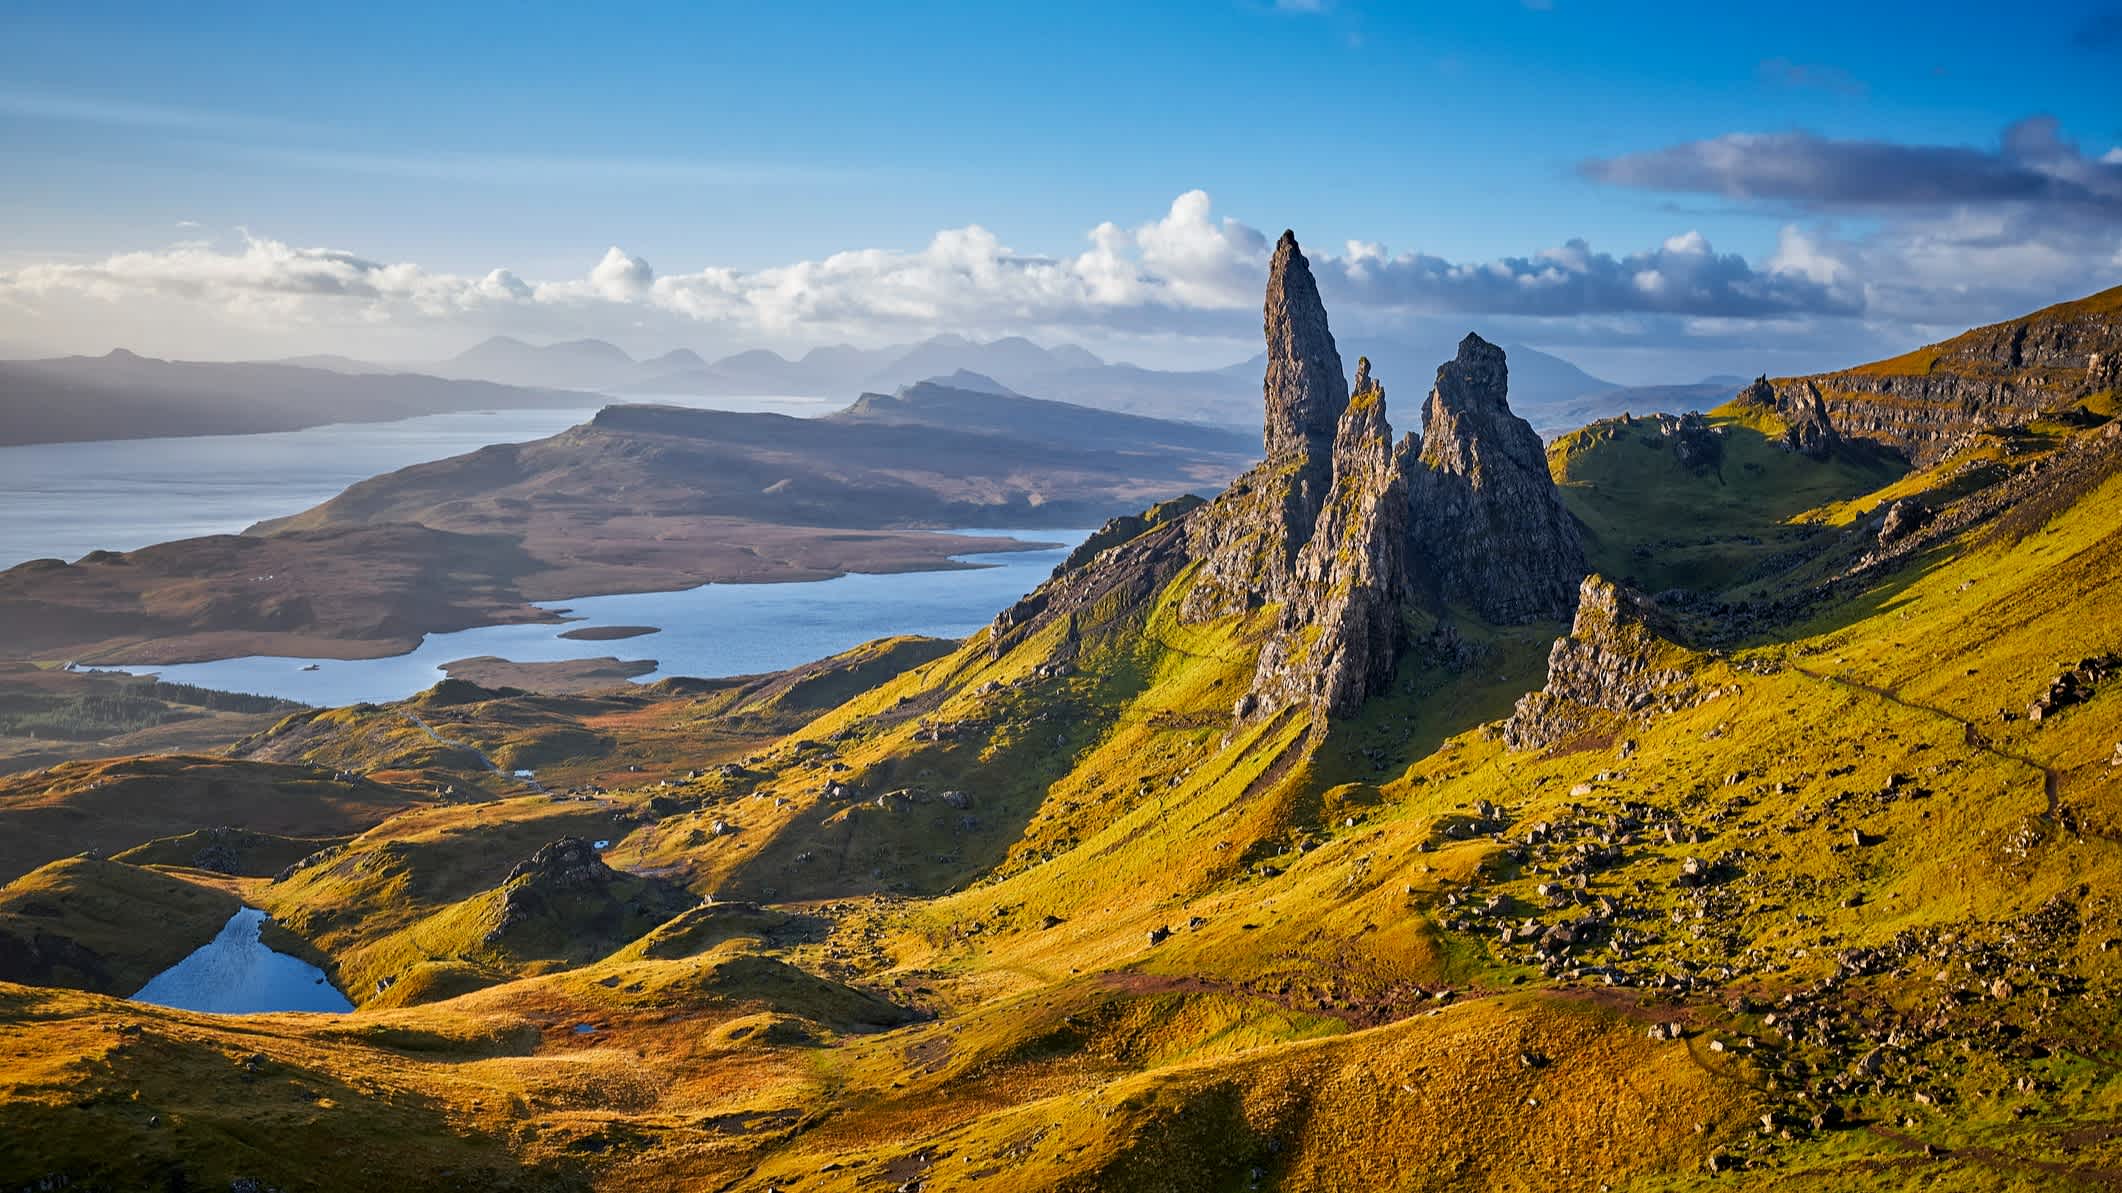 Vue panoramique sur The Old Man Of Storr, Isle Of Skye, Écosse.

